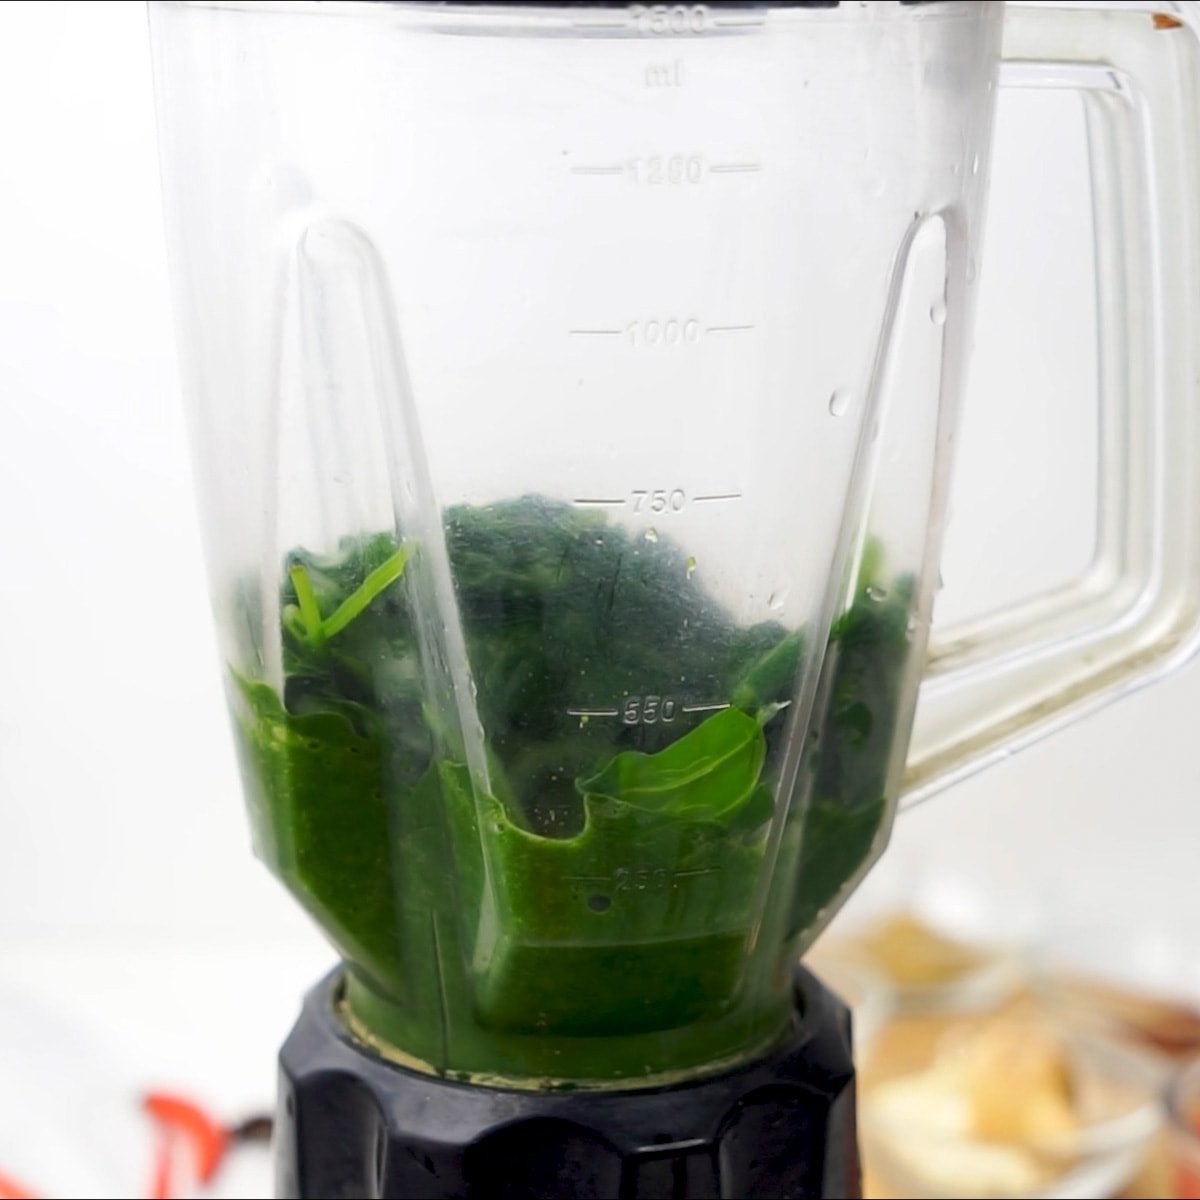 Blend spinach to a puree to make saag.